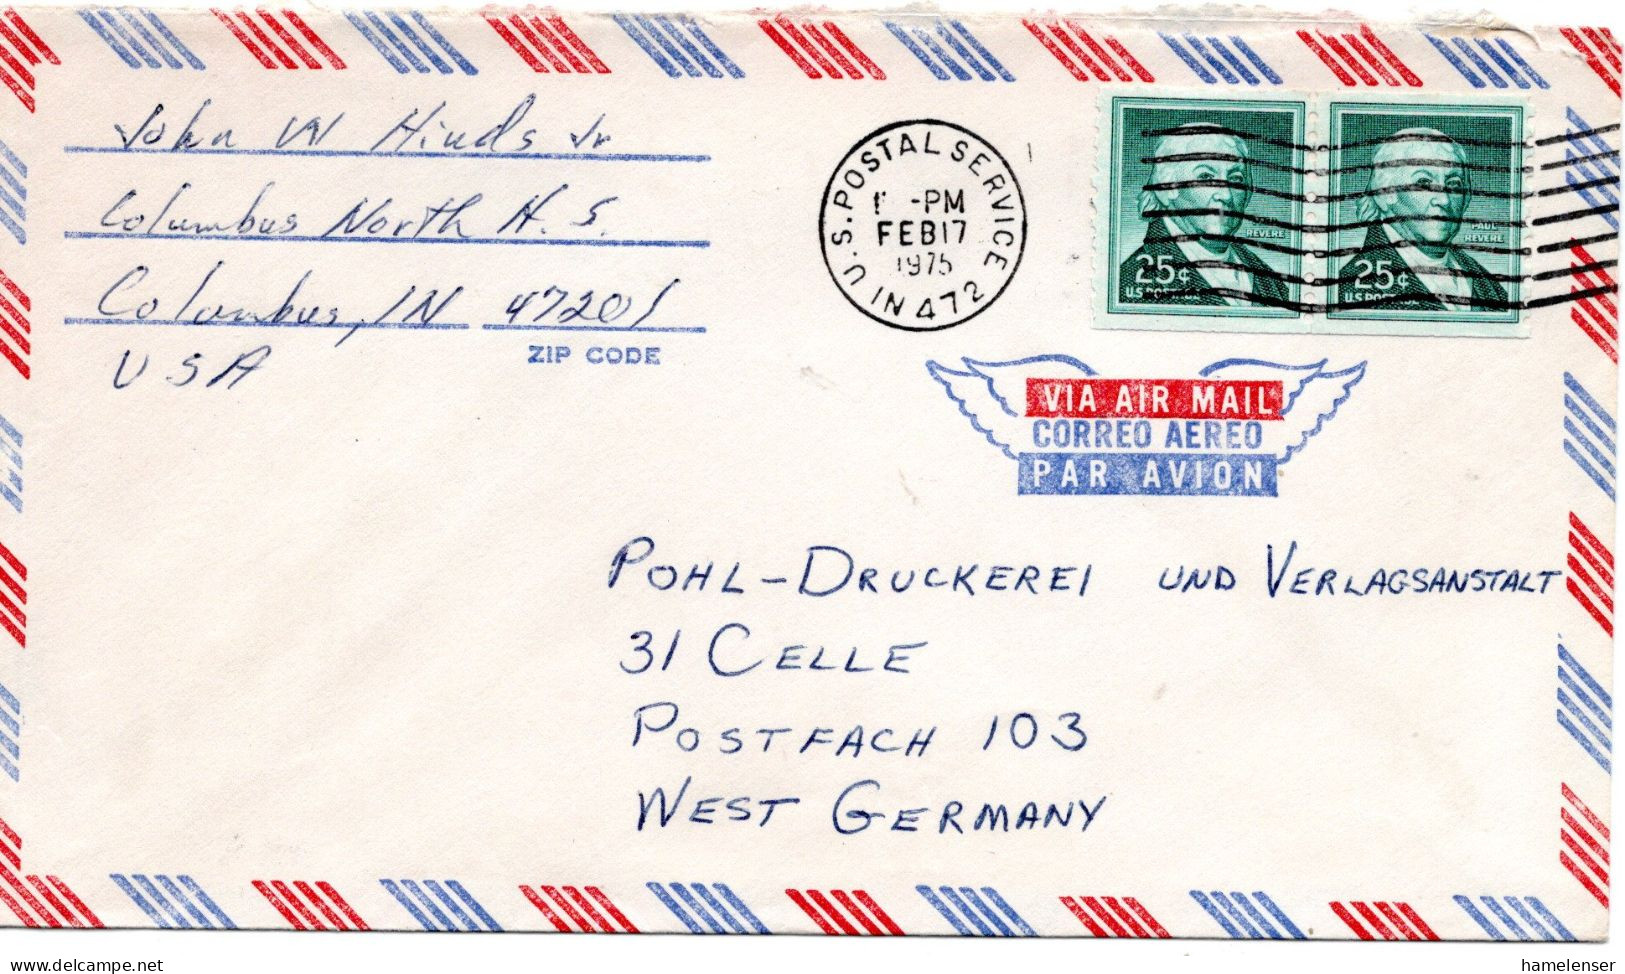 75199 - USA - 1975 - 2@25¢ Revere (Rolle) A LpBf U.S.POSTAL SERVICE IN 472 -> Westdeutschland - Covers & Documents